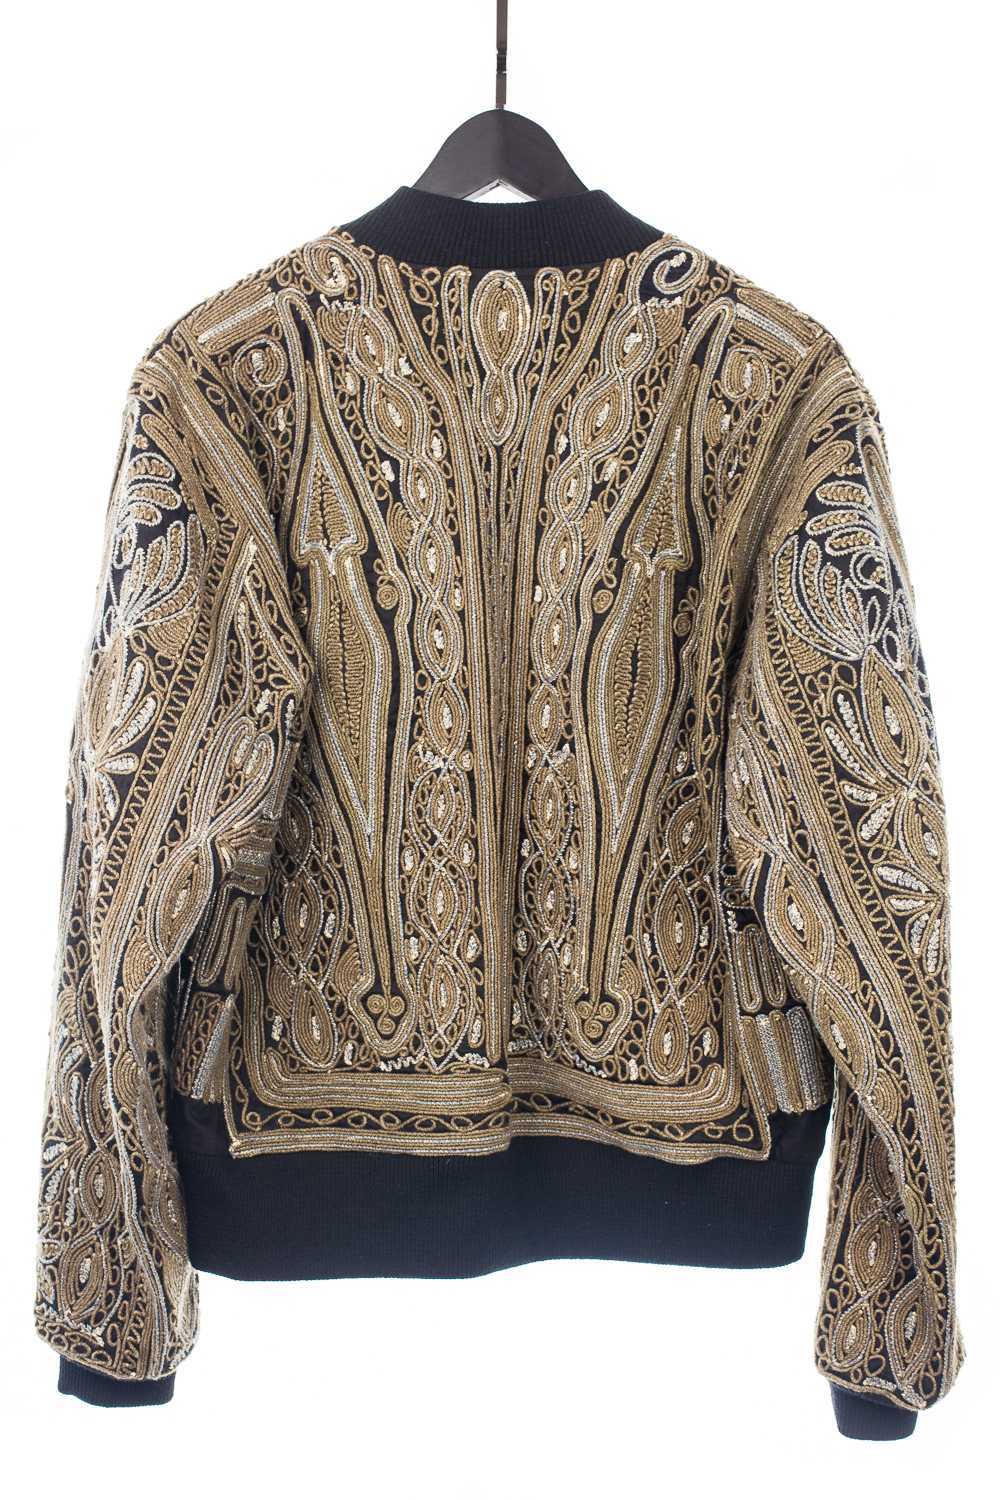 SS15 Rope Embroidered Reversible Bomber - image 3